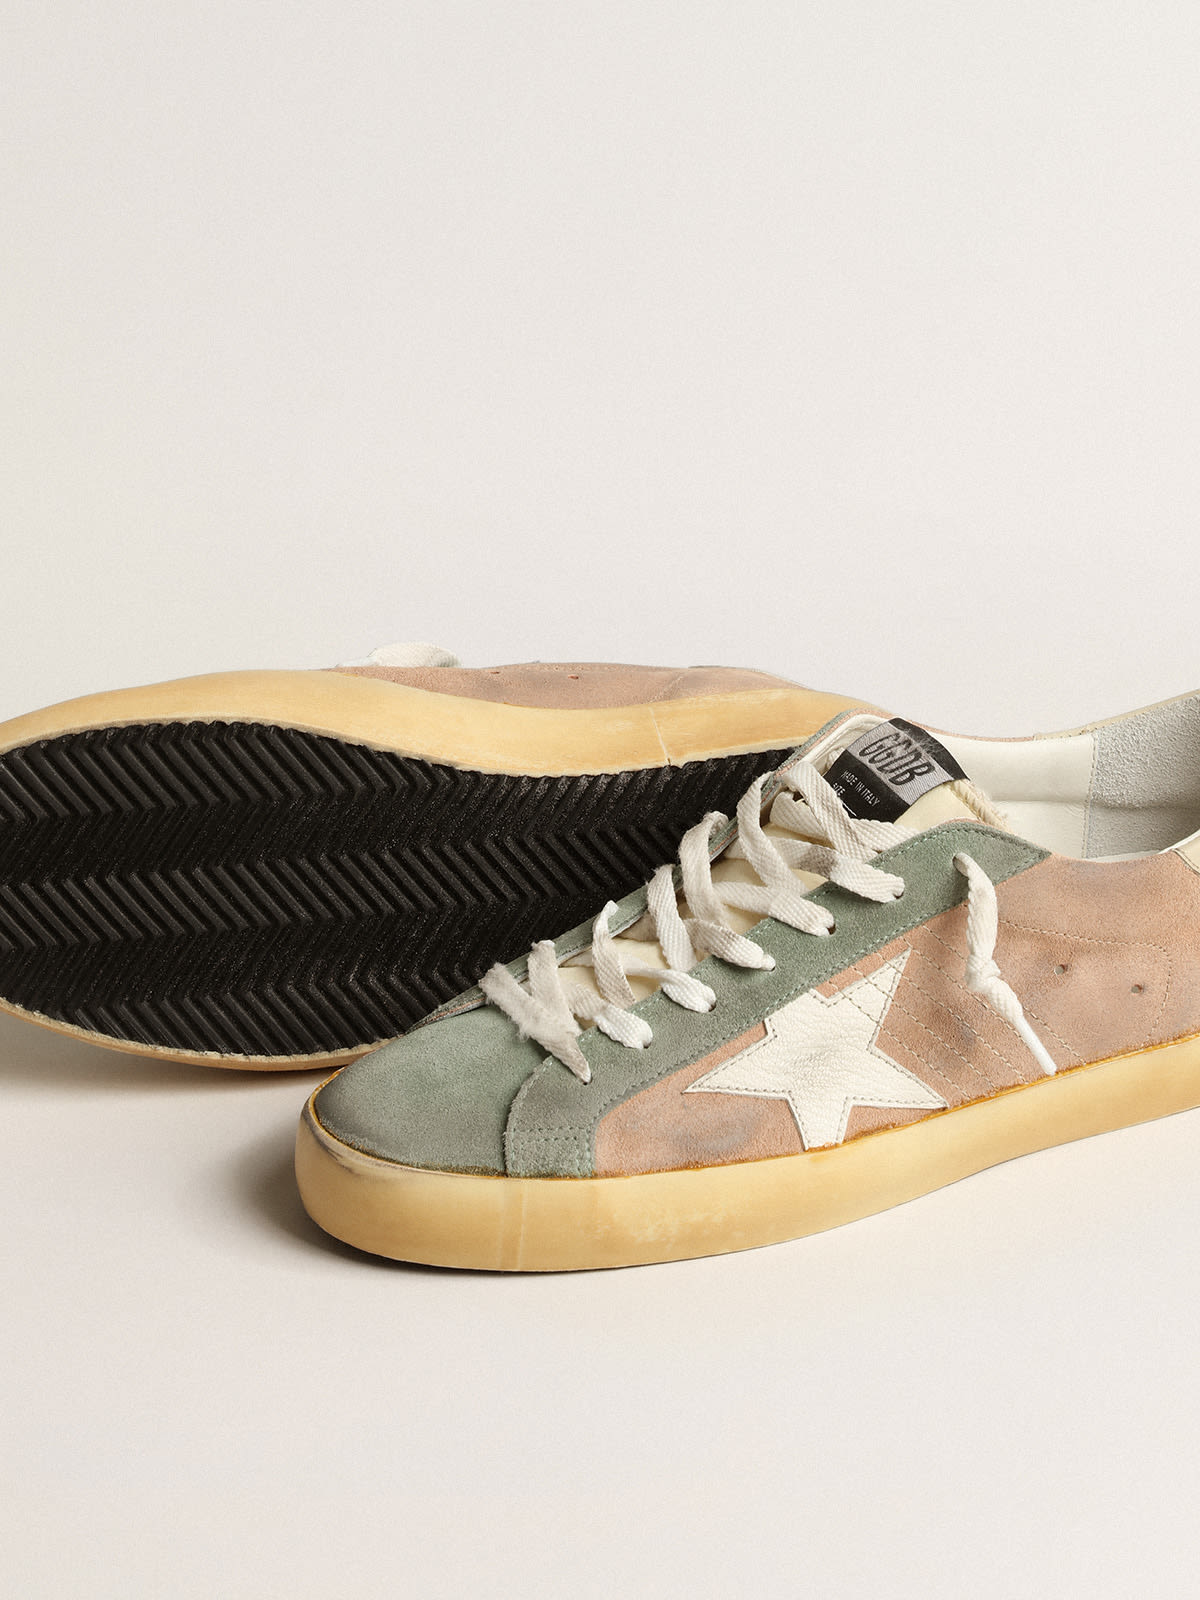 Golden Goose - Super-Star in brown and green suede with white nappa leather star in 